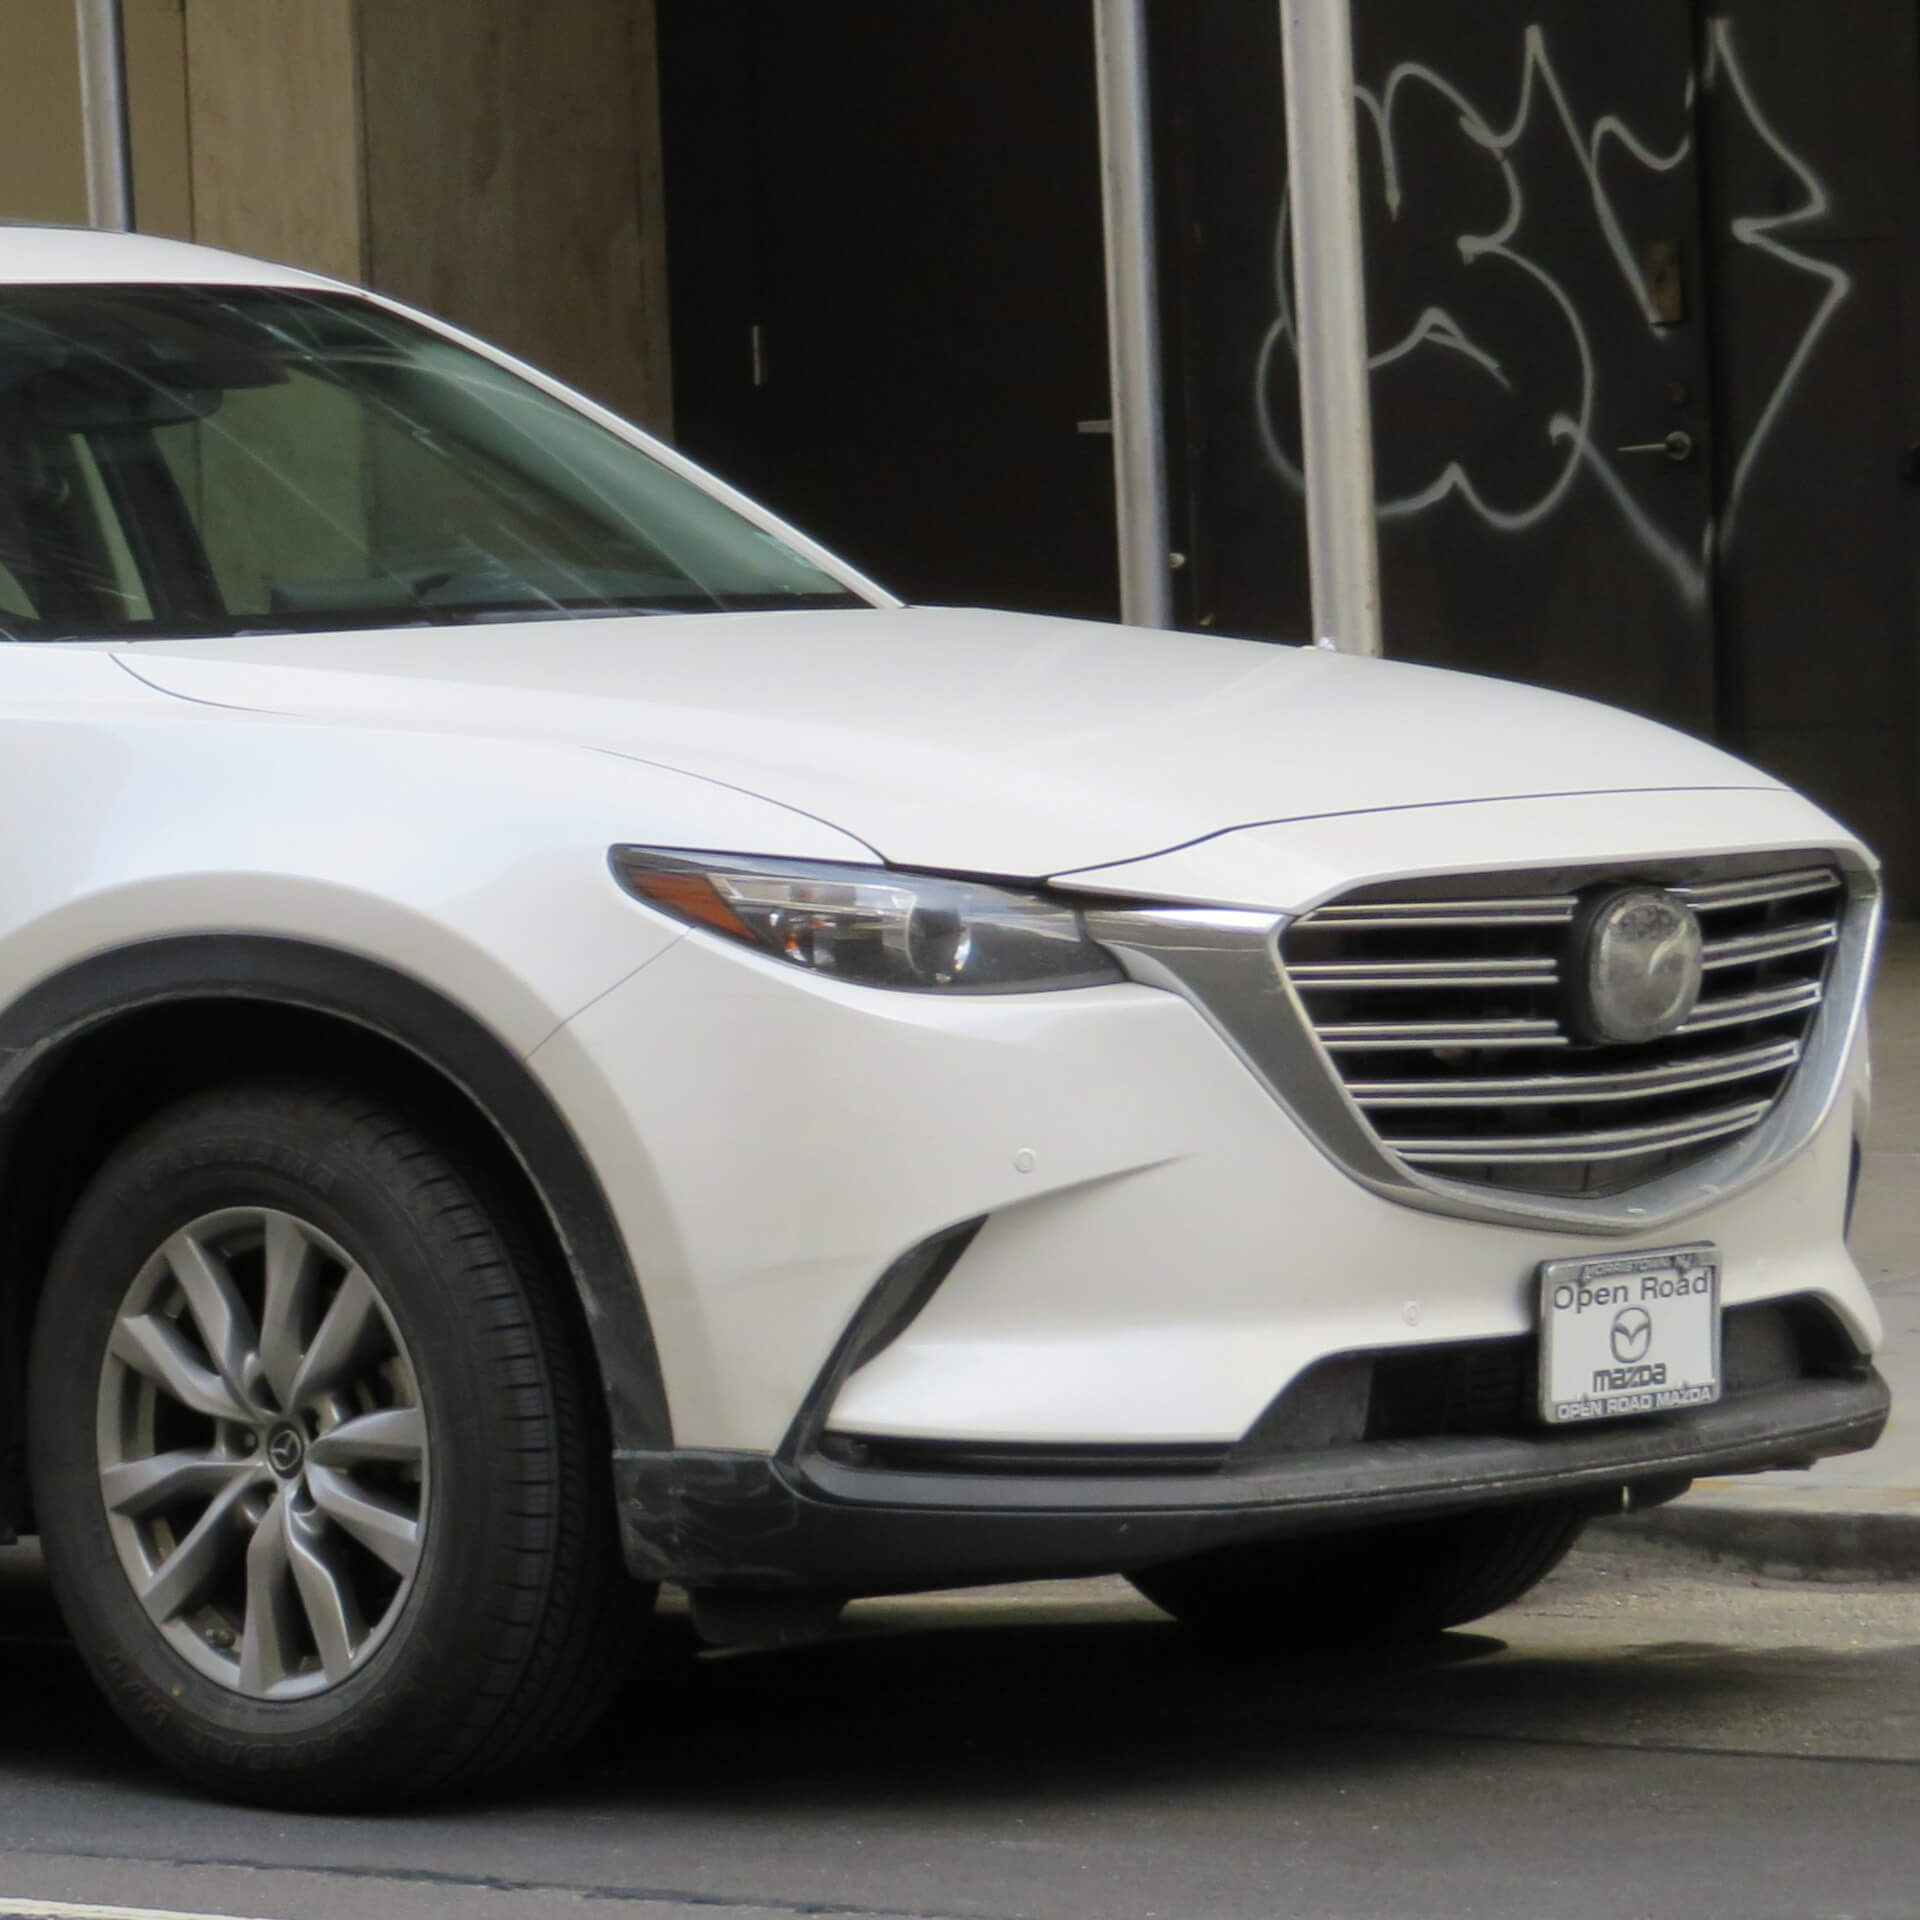 Direct4x4 accessories for Mazda CX-9 vehicles with a photo of the front of a white Mazda CX-9